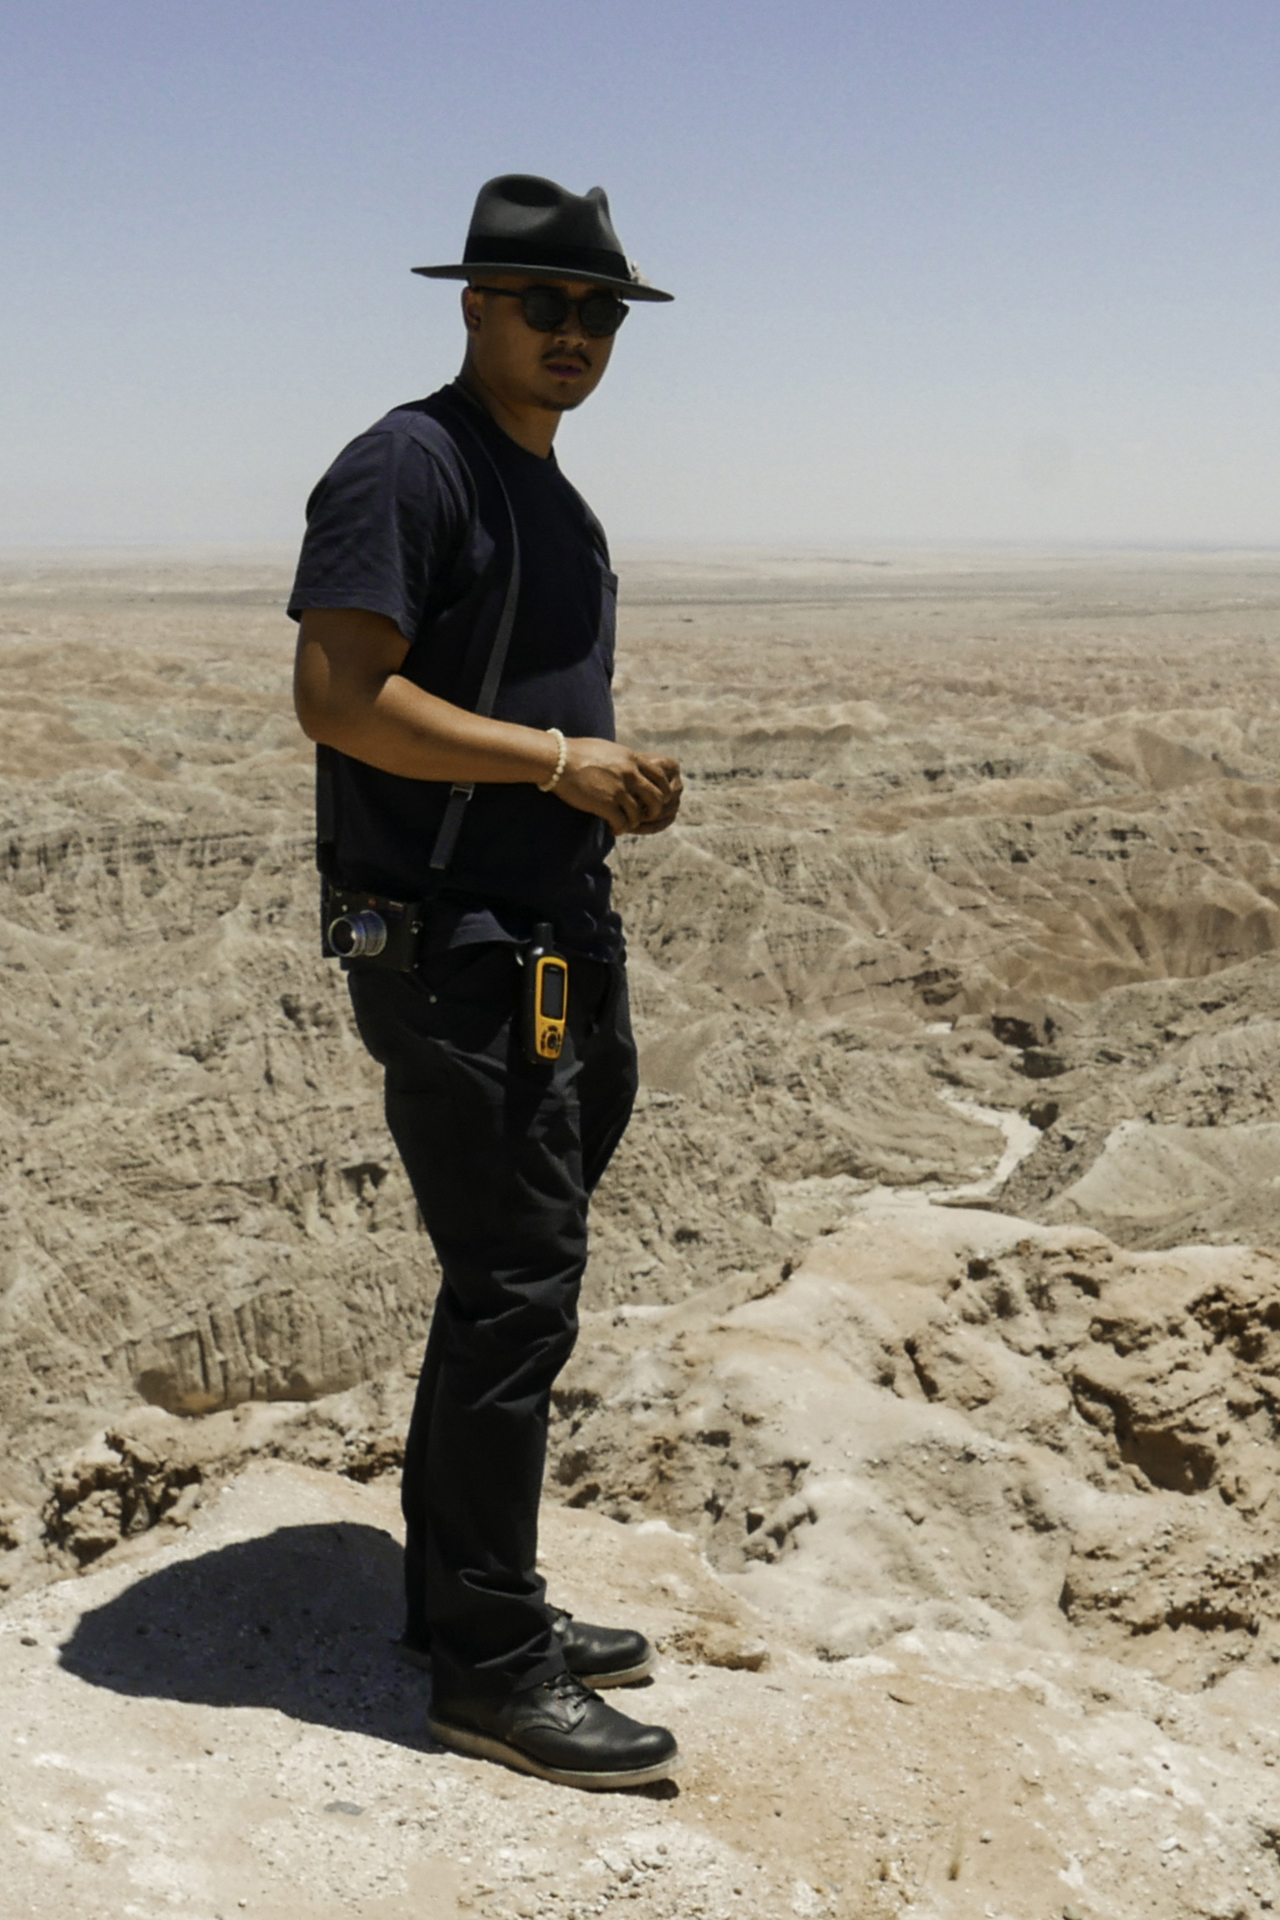 Man wearing summerblack and sunglasses in the desert